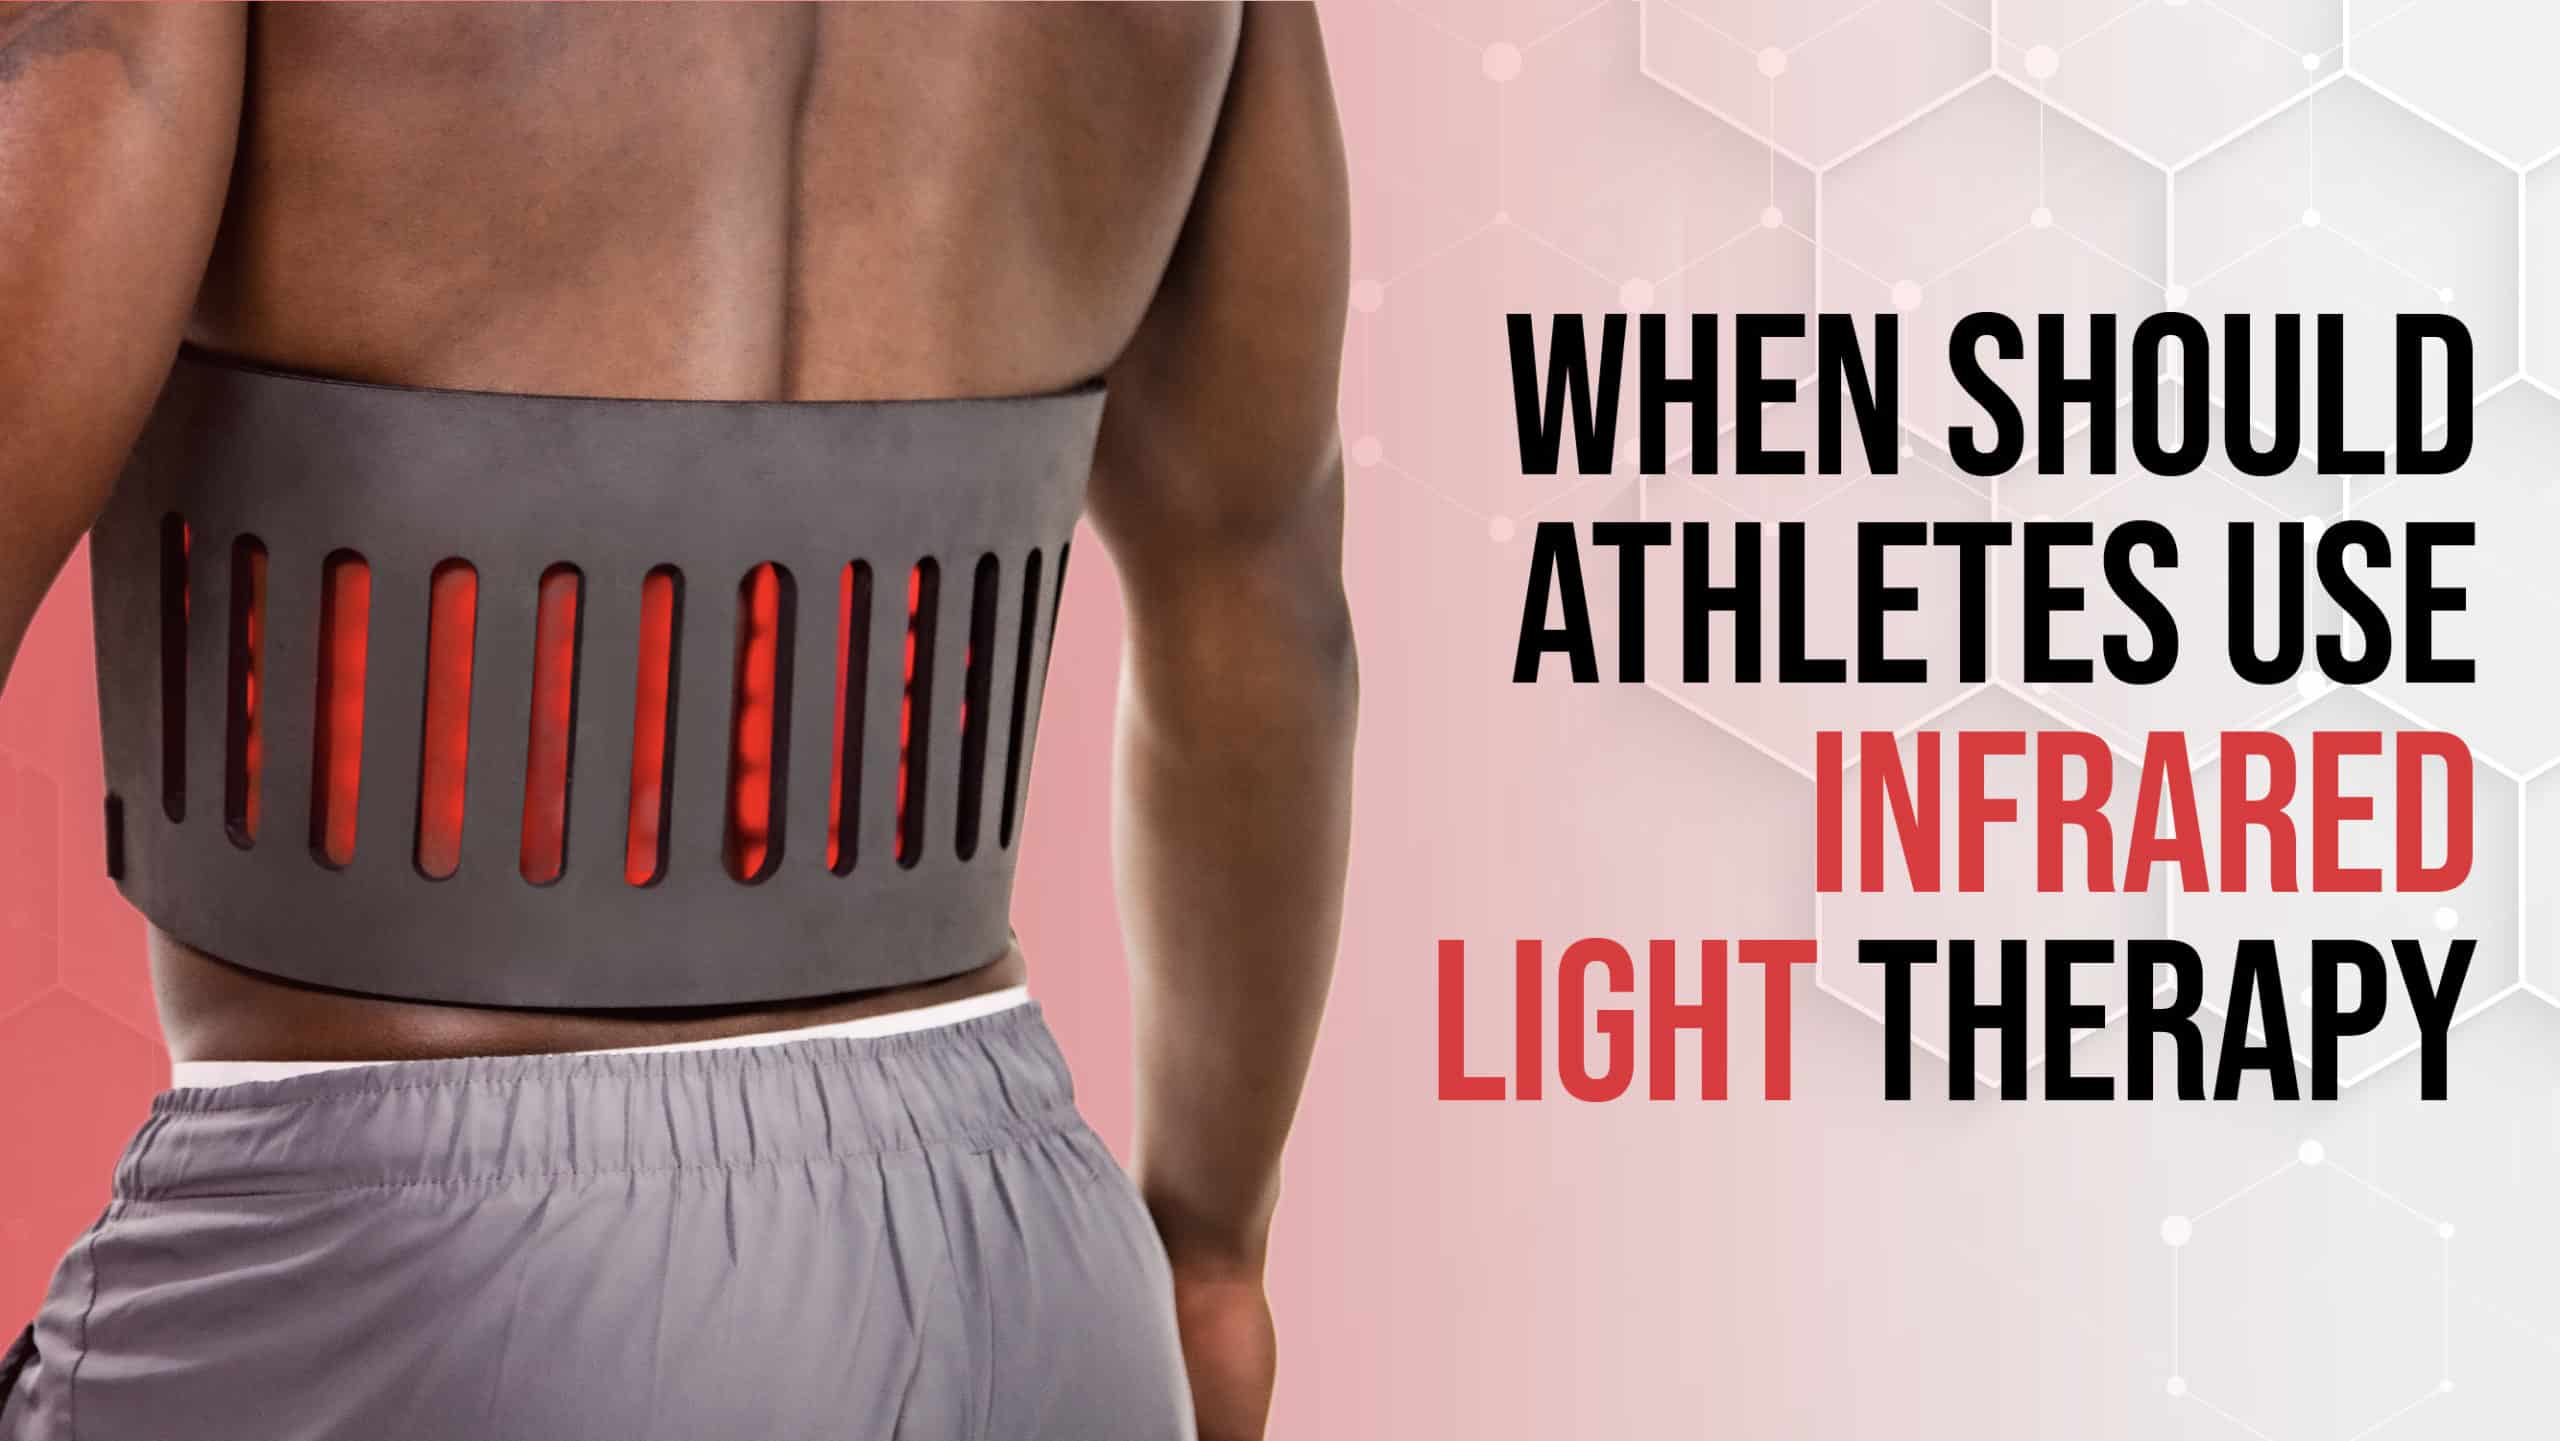 When Should Athletes Use Infrared Light Therapy? featured image